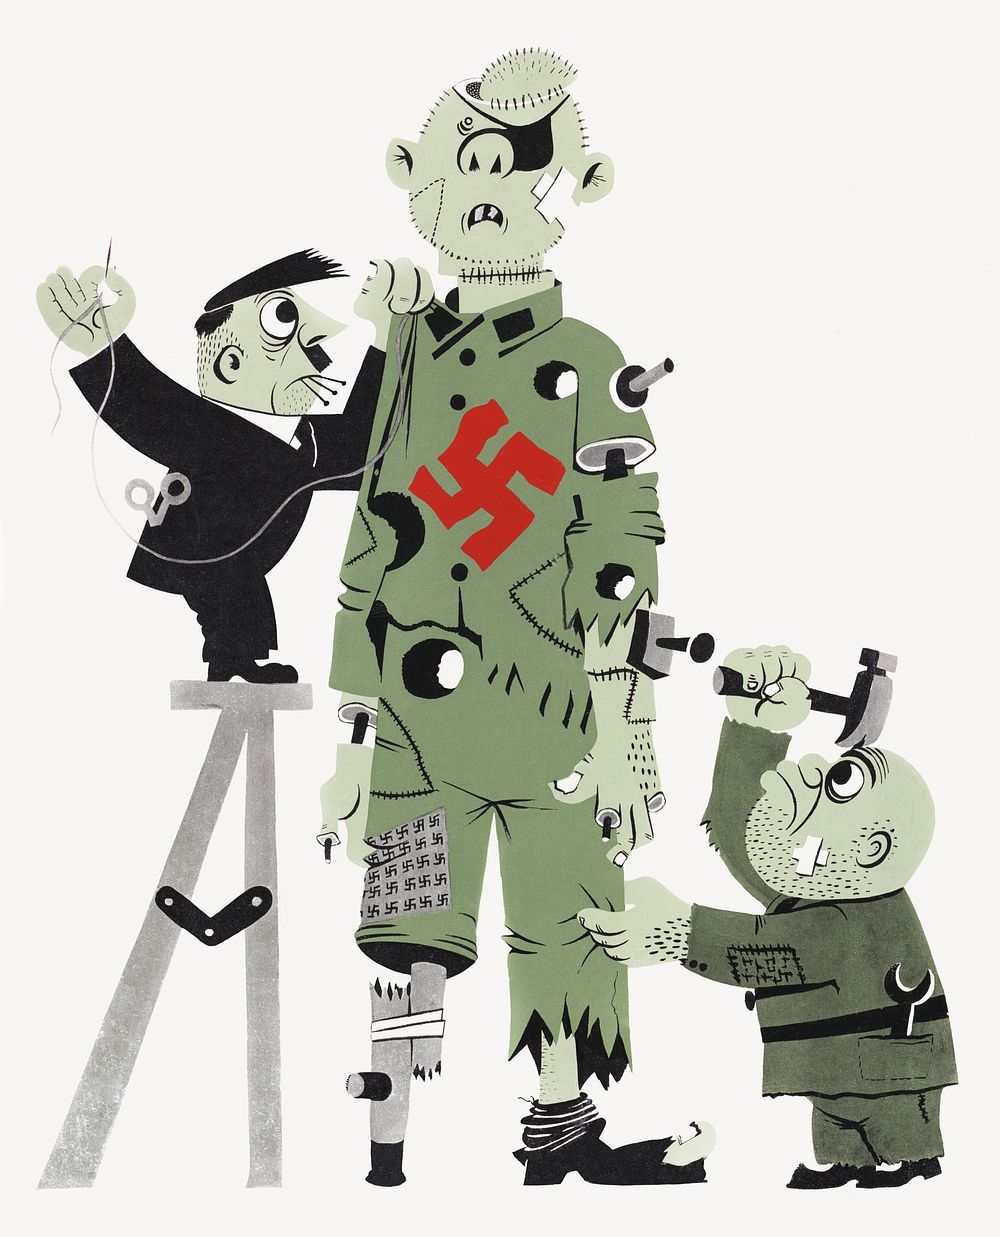 Hitler and Mussolini making a puppet (1945) propaganda, war poster. Original public domain image from the Library of…